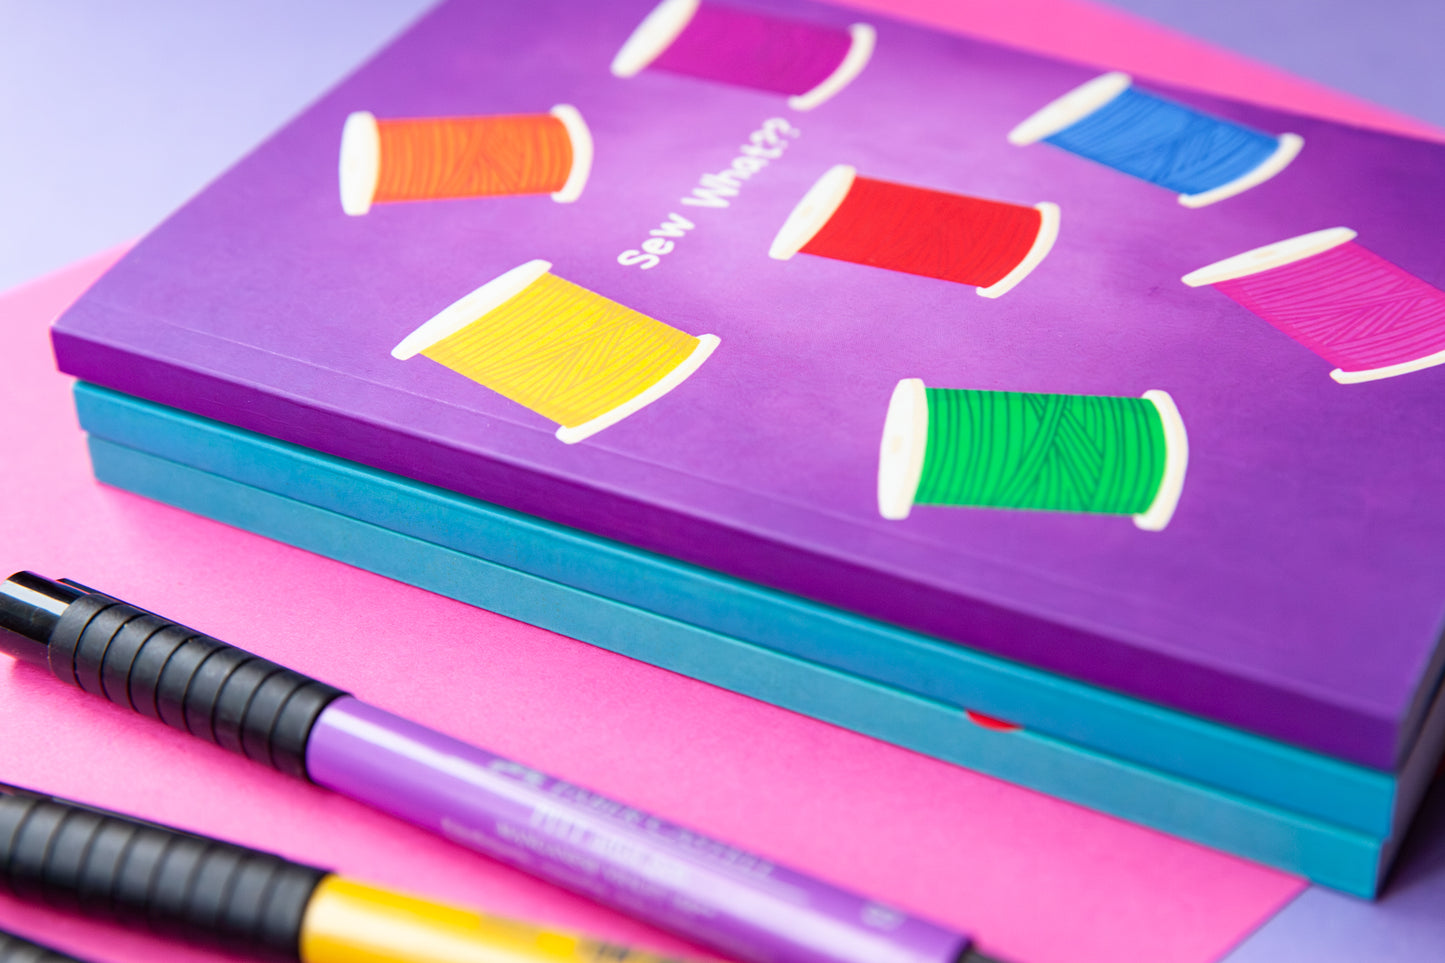 a stack of purple and teal notebooks that shows the thickness of the spine. The purple notebook on the top has a cover illustration of colourful spools of thread in a rainbow of colours